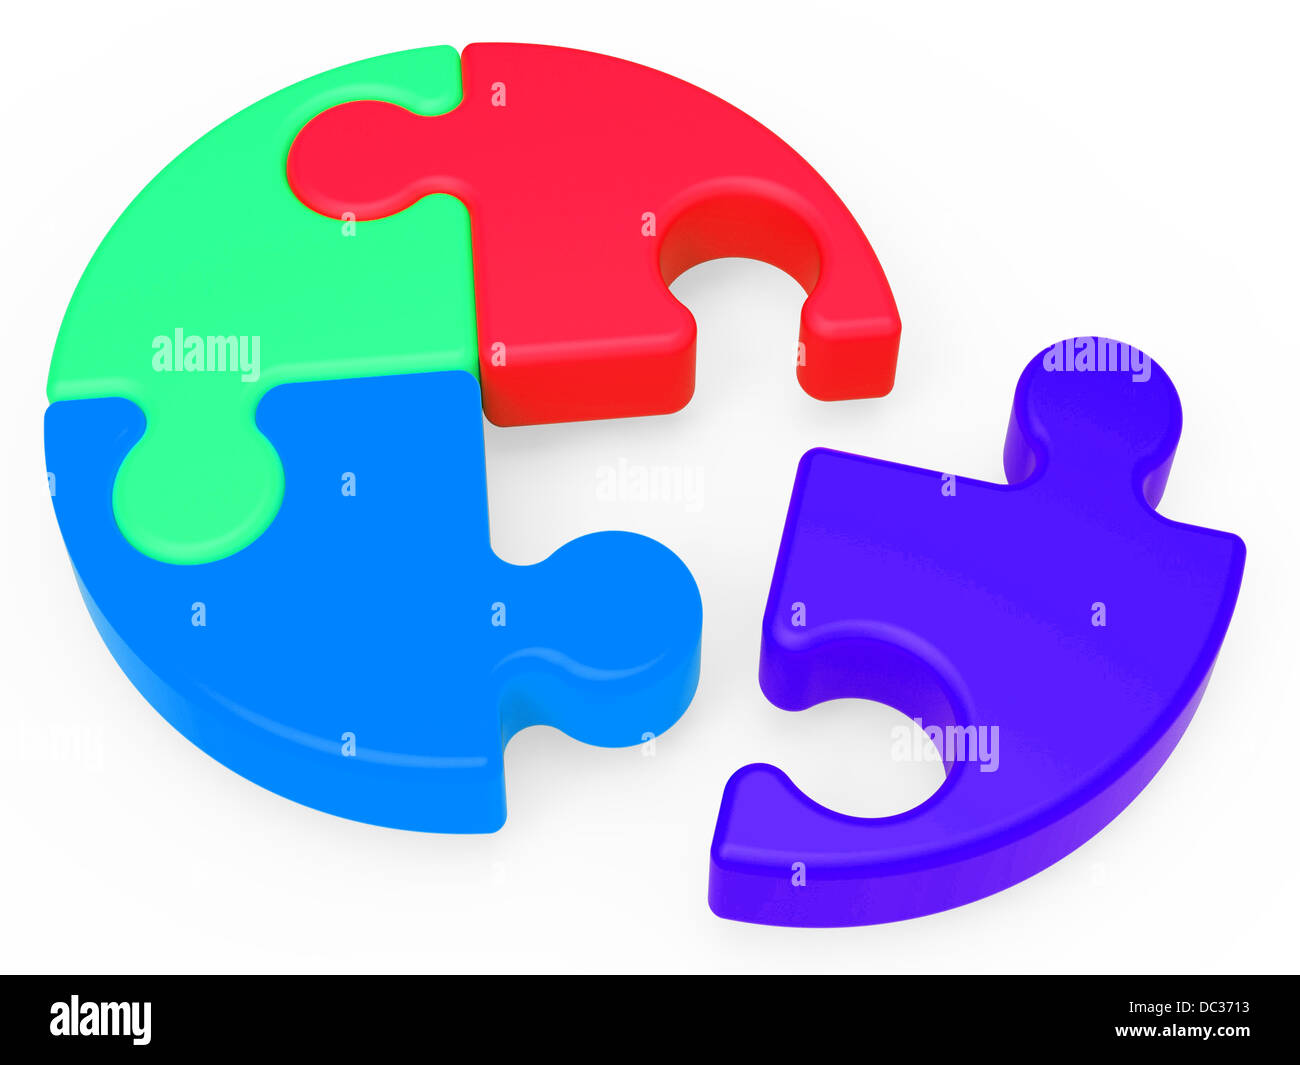 Unfinished Puzzle Shows Missing Piece Stock Photo